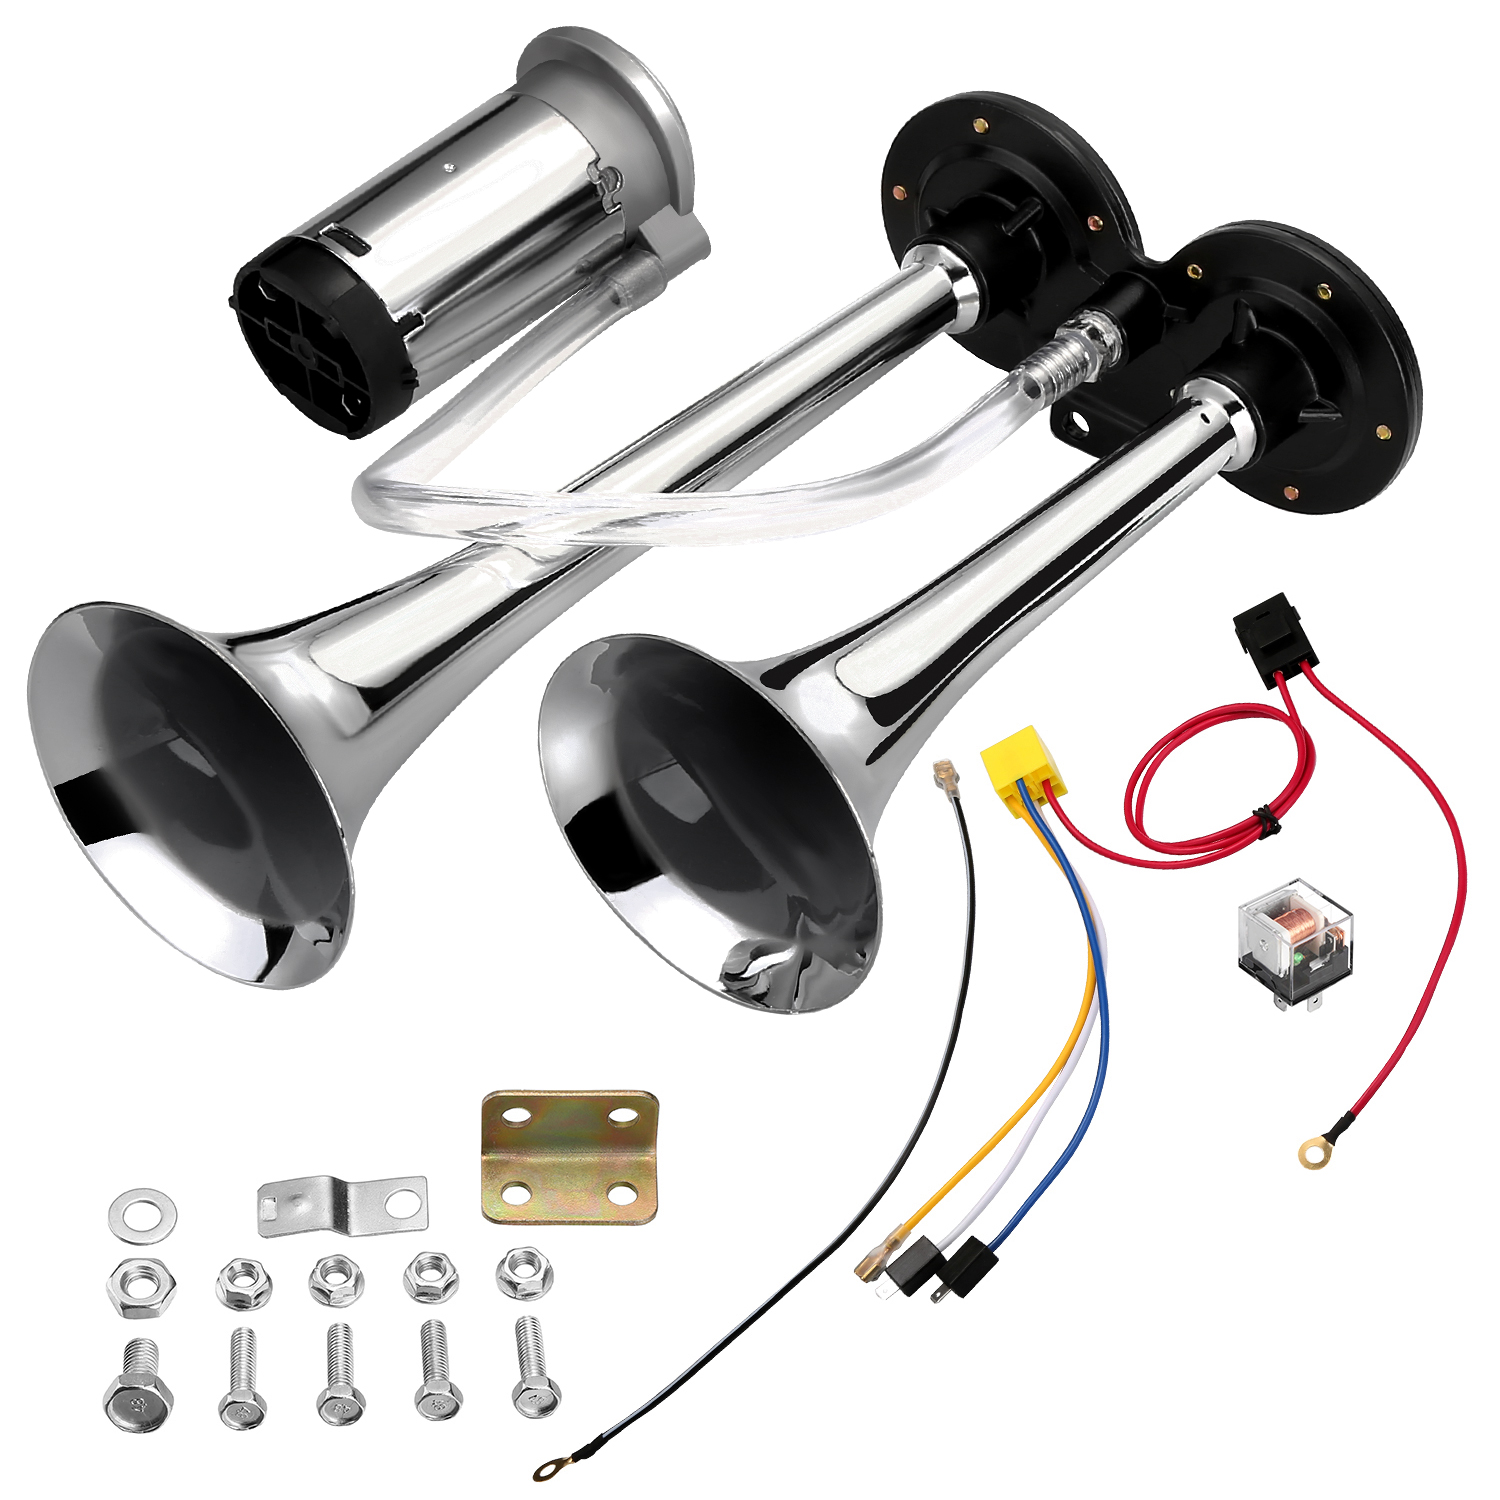 Super Loud Twin Tone Chrome Plated Zinc Dual Trumpet Air Horn with Compressor for Any 12V Vehicles Car Truck RV Van SUV Motorcycle Off Road Boat MIRKOO 12V 150dB Car Air Horn Kit Silver 